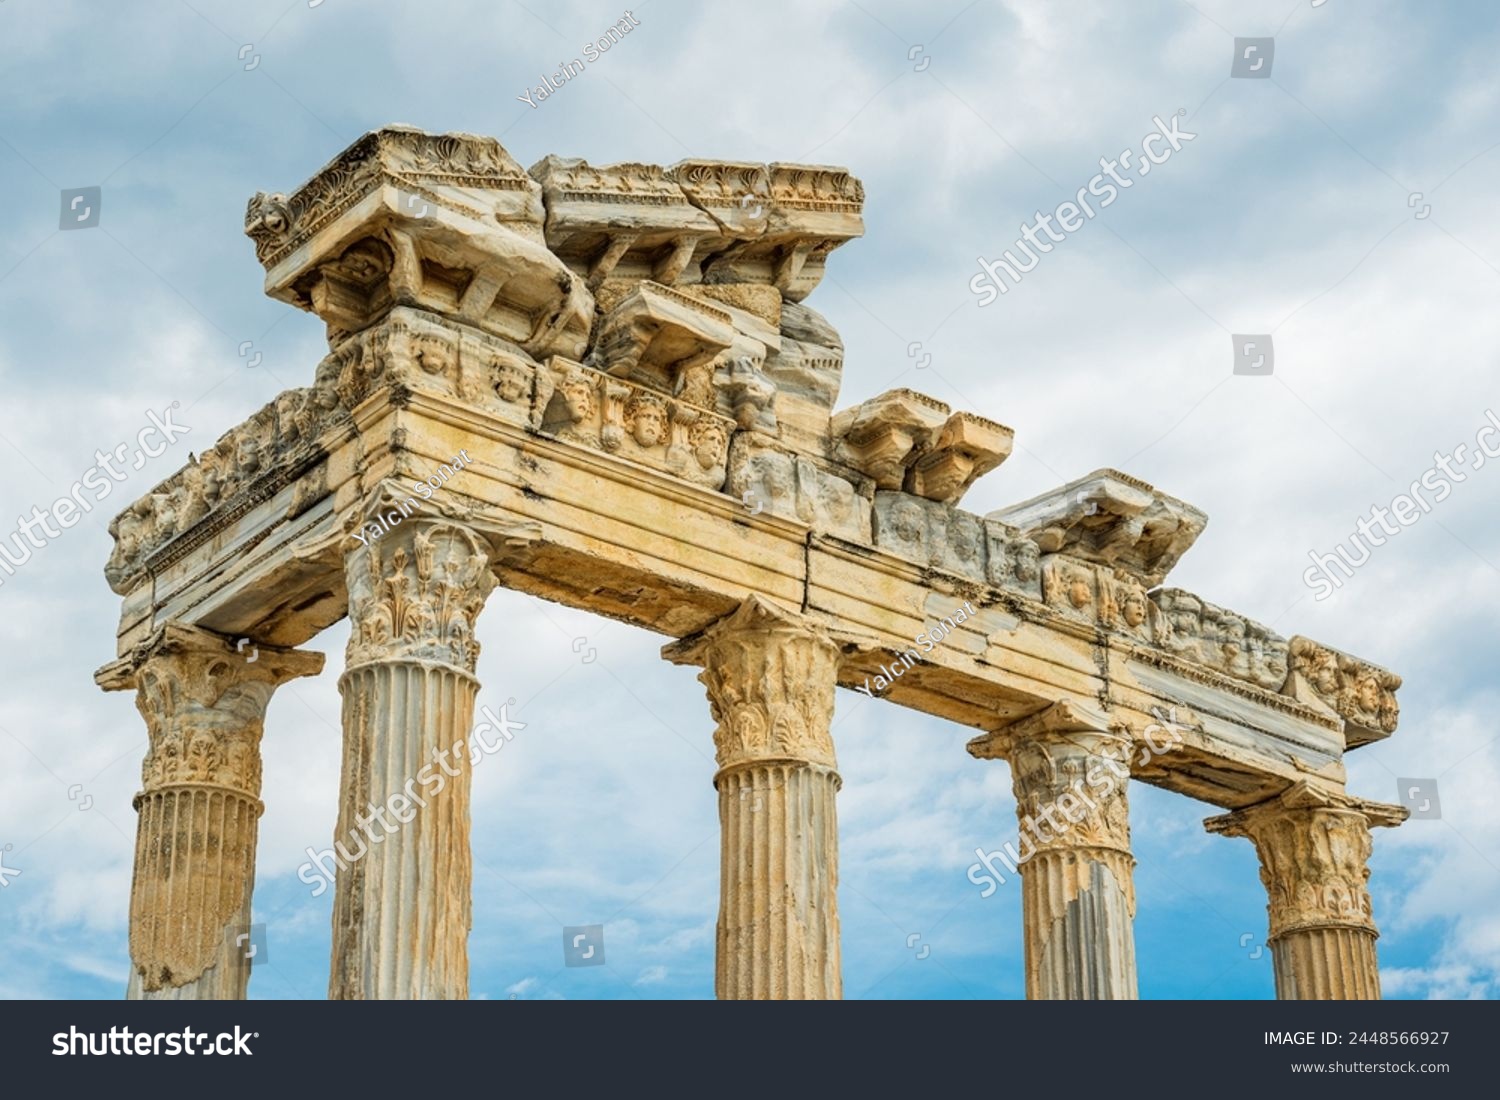 Temple of Apollo in Side Ancient City on a cloudy spring day #2448566927